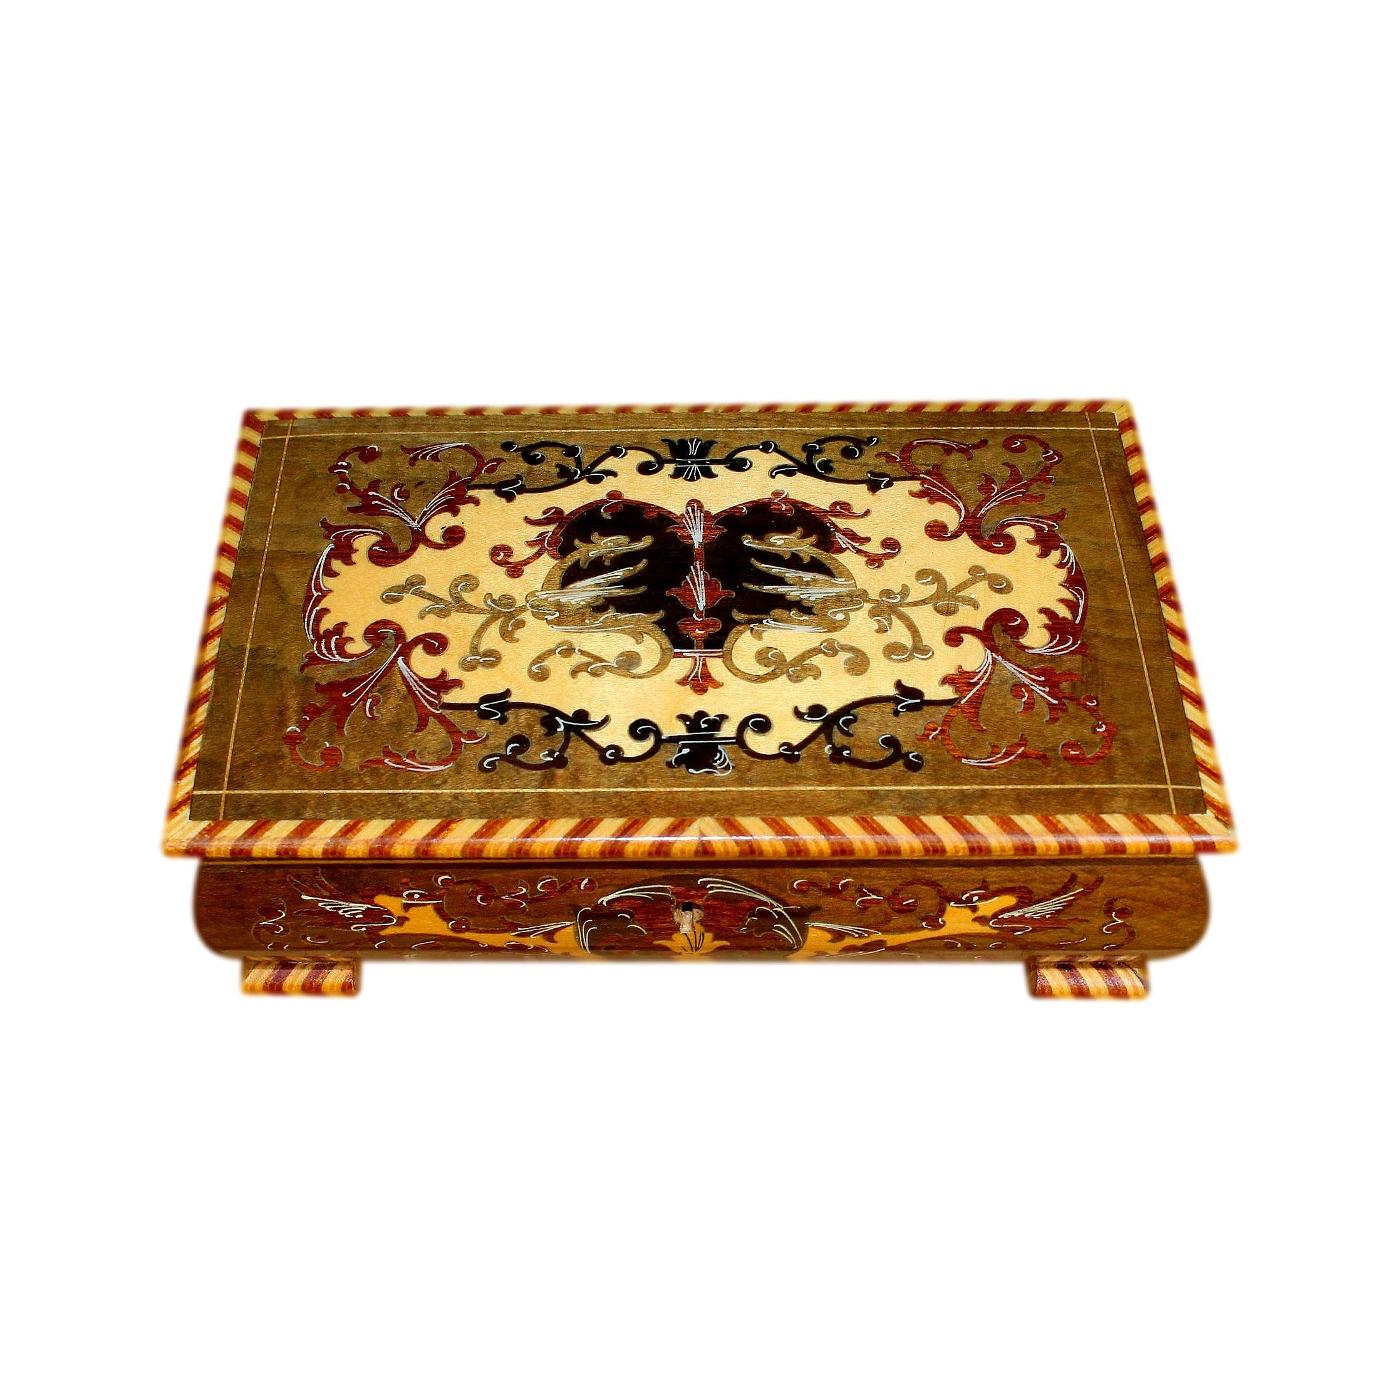 Beautiful Italian Musical Vintage Jewellery Box With Marquetry Inlay